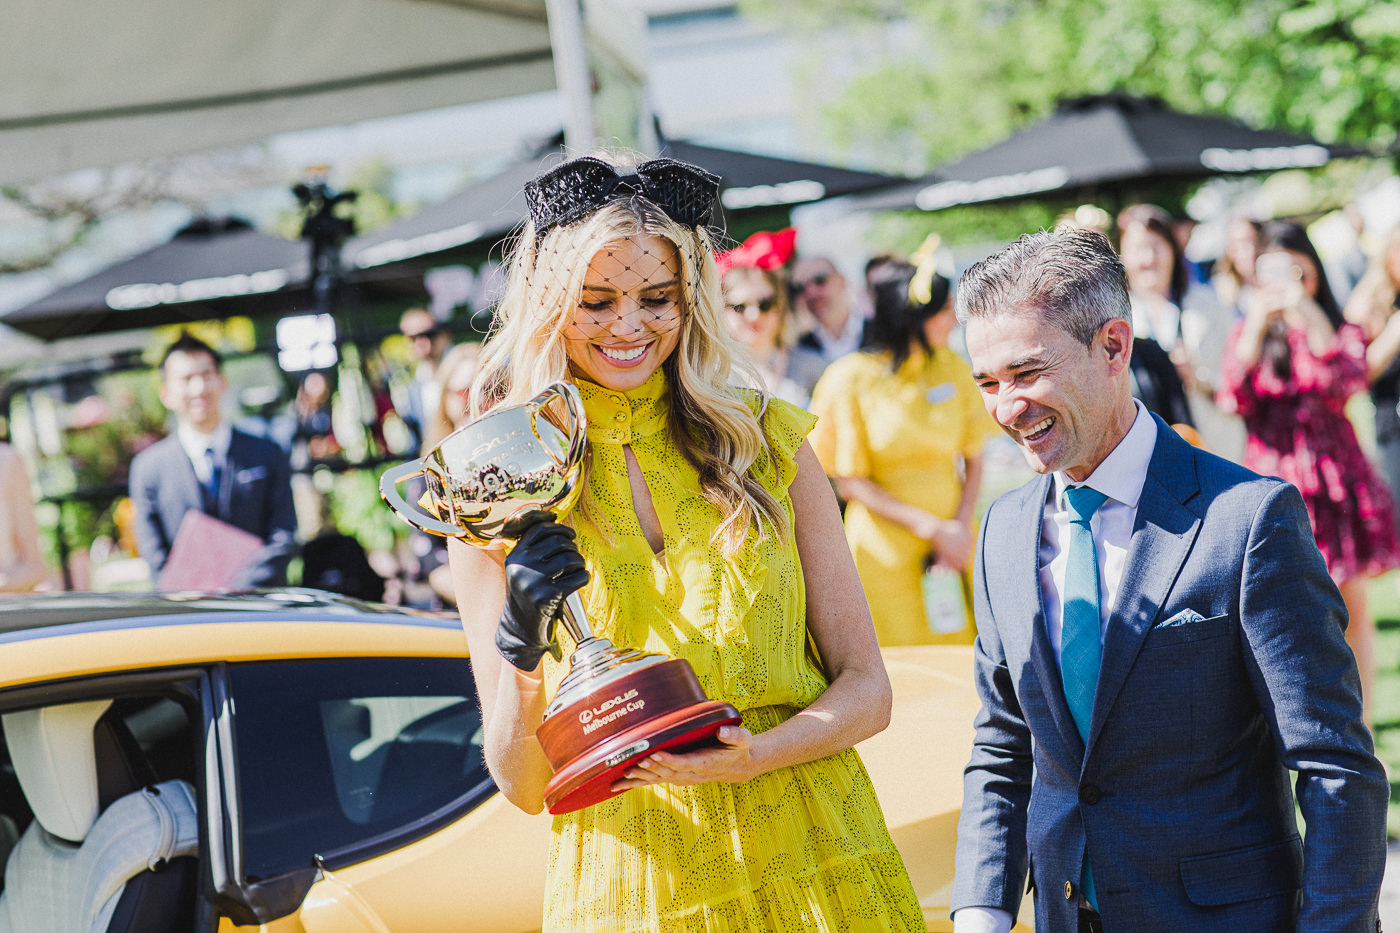 2019 Lexus Melbourne Cup, will be welcomed home in fantastic fashion as it’s delivered to the stage by 2019 VRC Melbourne Cup Carnival ambassador Tegan Martin and two-time Lexus Melbourne Cup winning jockey and Lexus ambassador Corey Brown